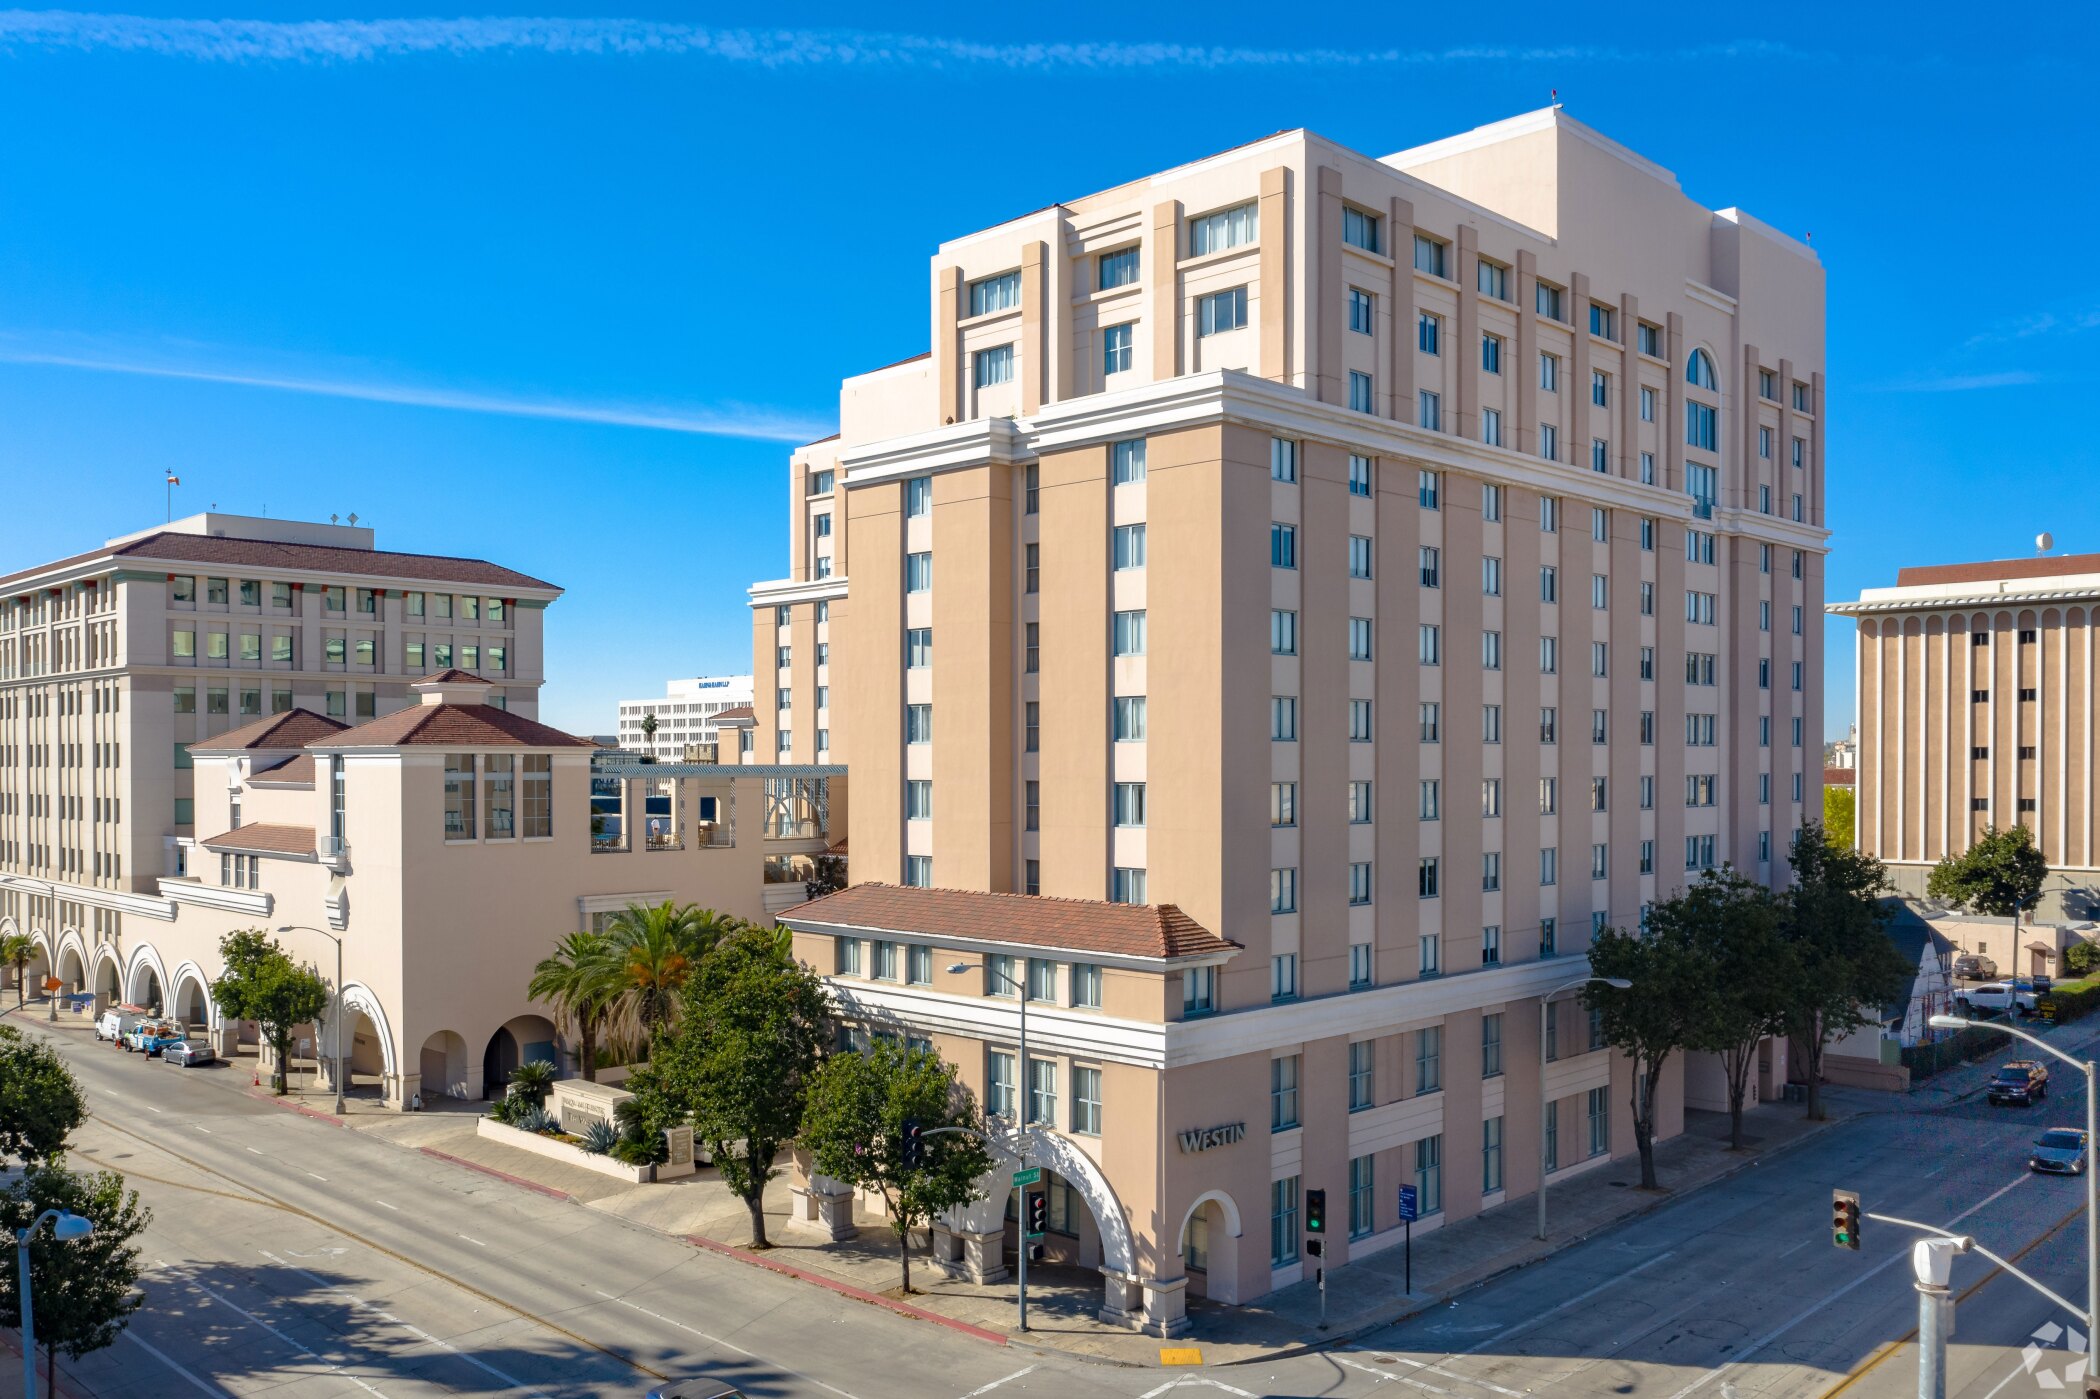 At $189.7 million, the 350-room Westin Pasadena was the highest-priced hotel sold in Los Angeles County in 2022. (CoStar)